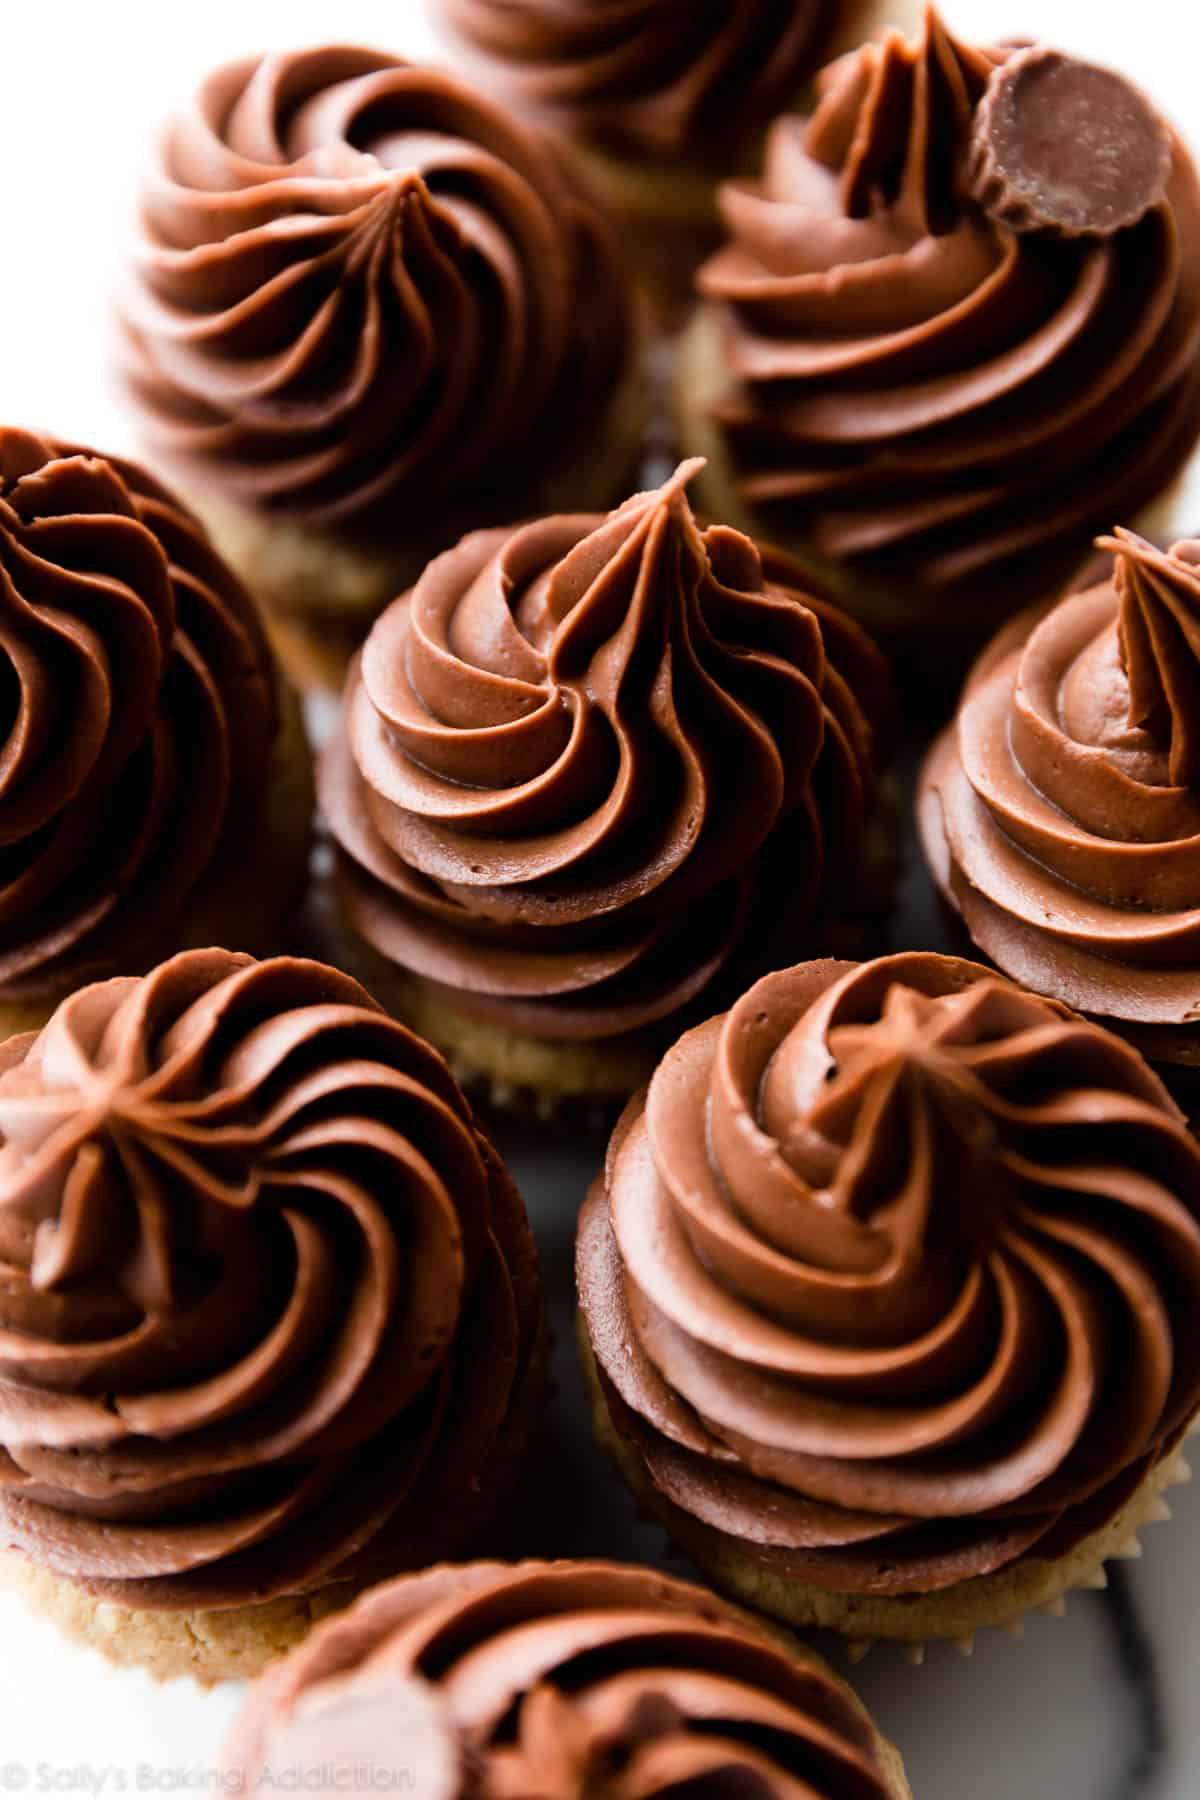 Chocolate peanut butter frosting